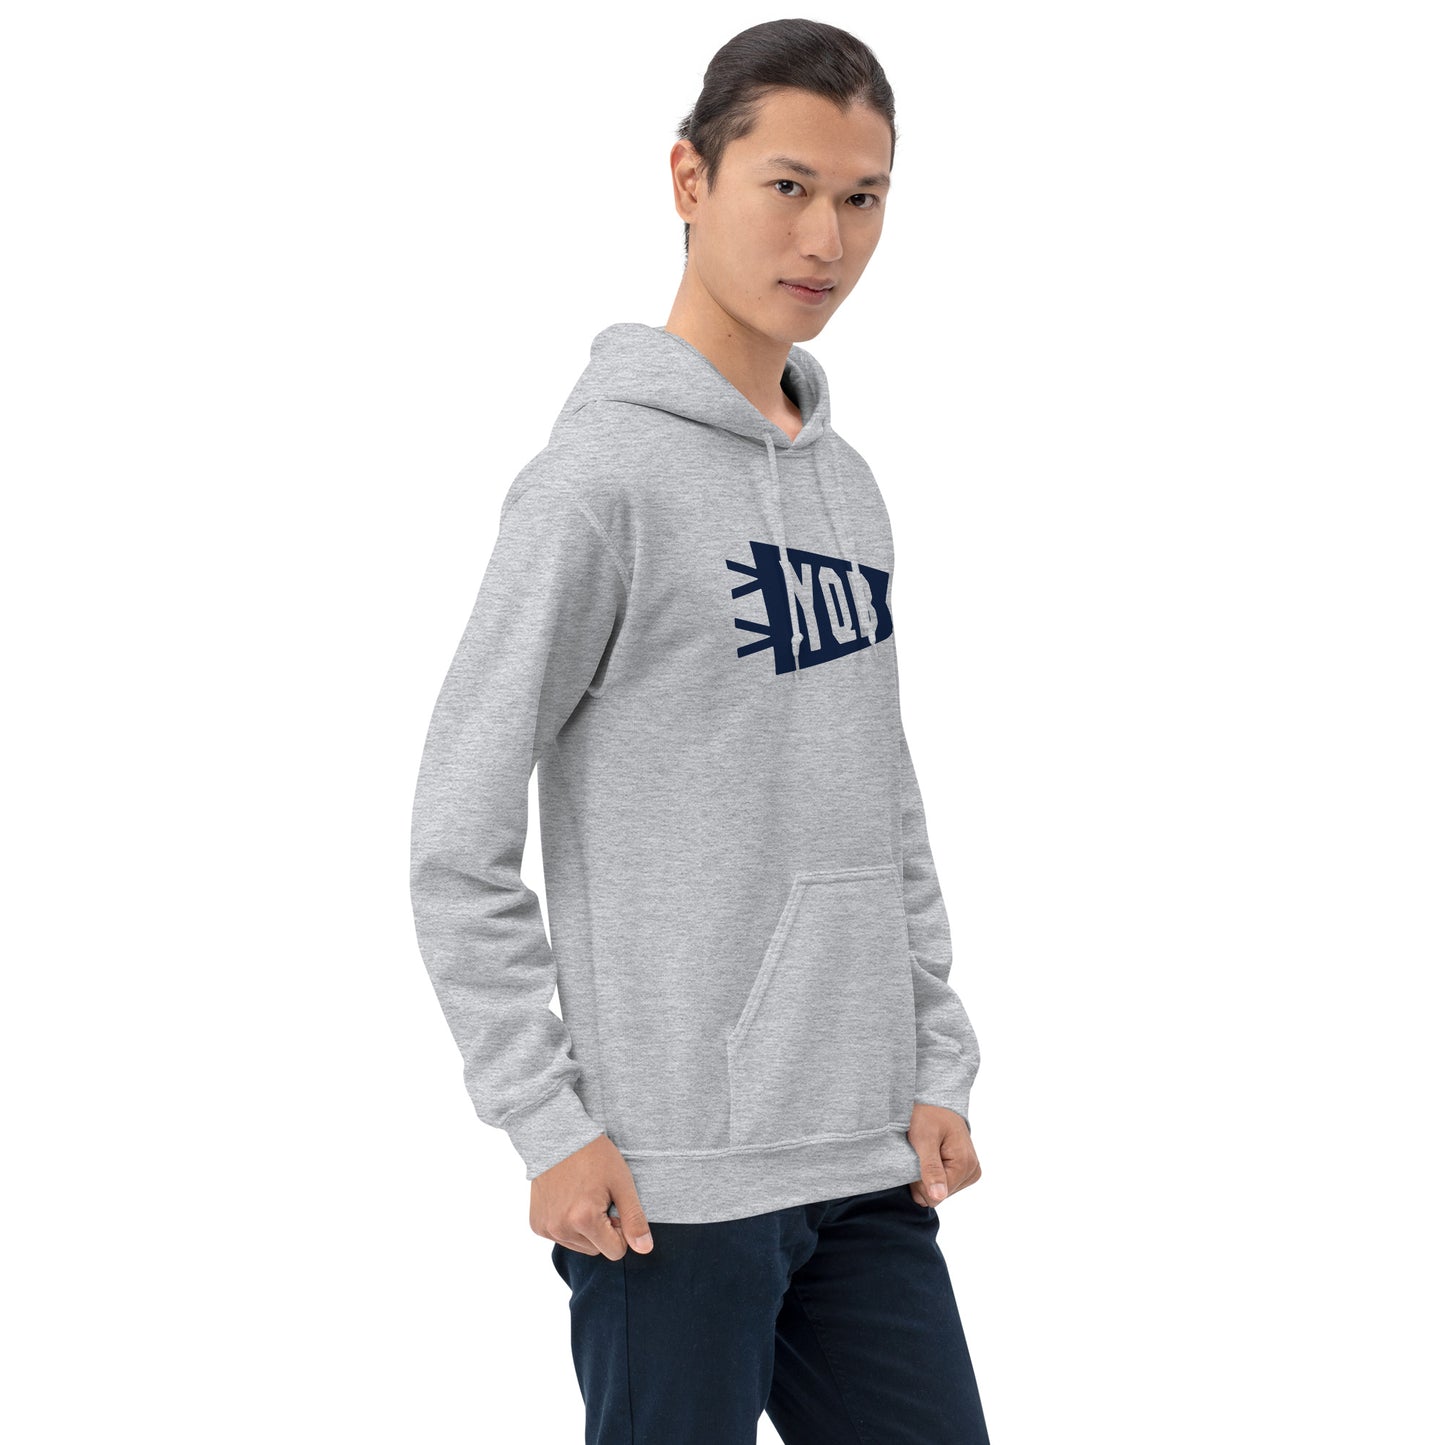 Airport Code Unisex Hoodie - Navy Blue Graphic • YQB Quebec City • YHM Designs - Image 09